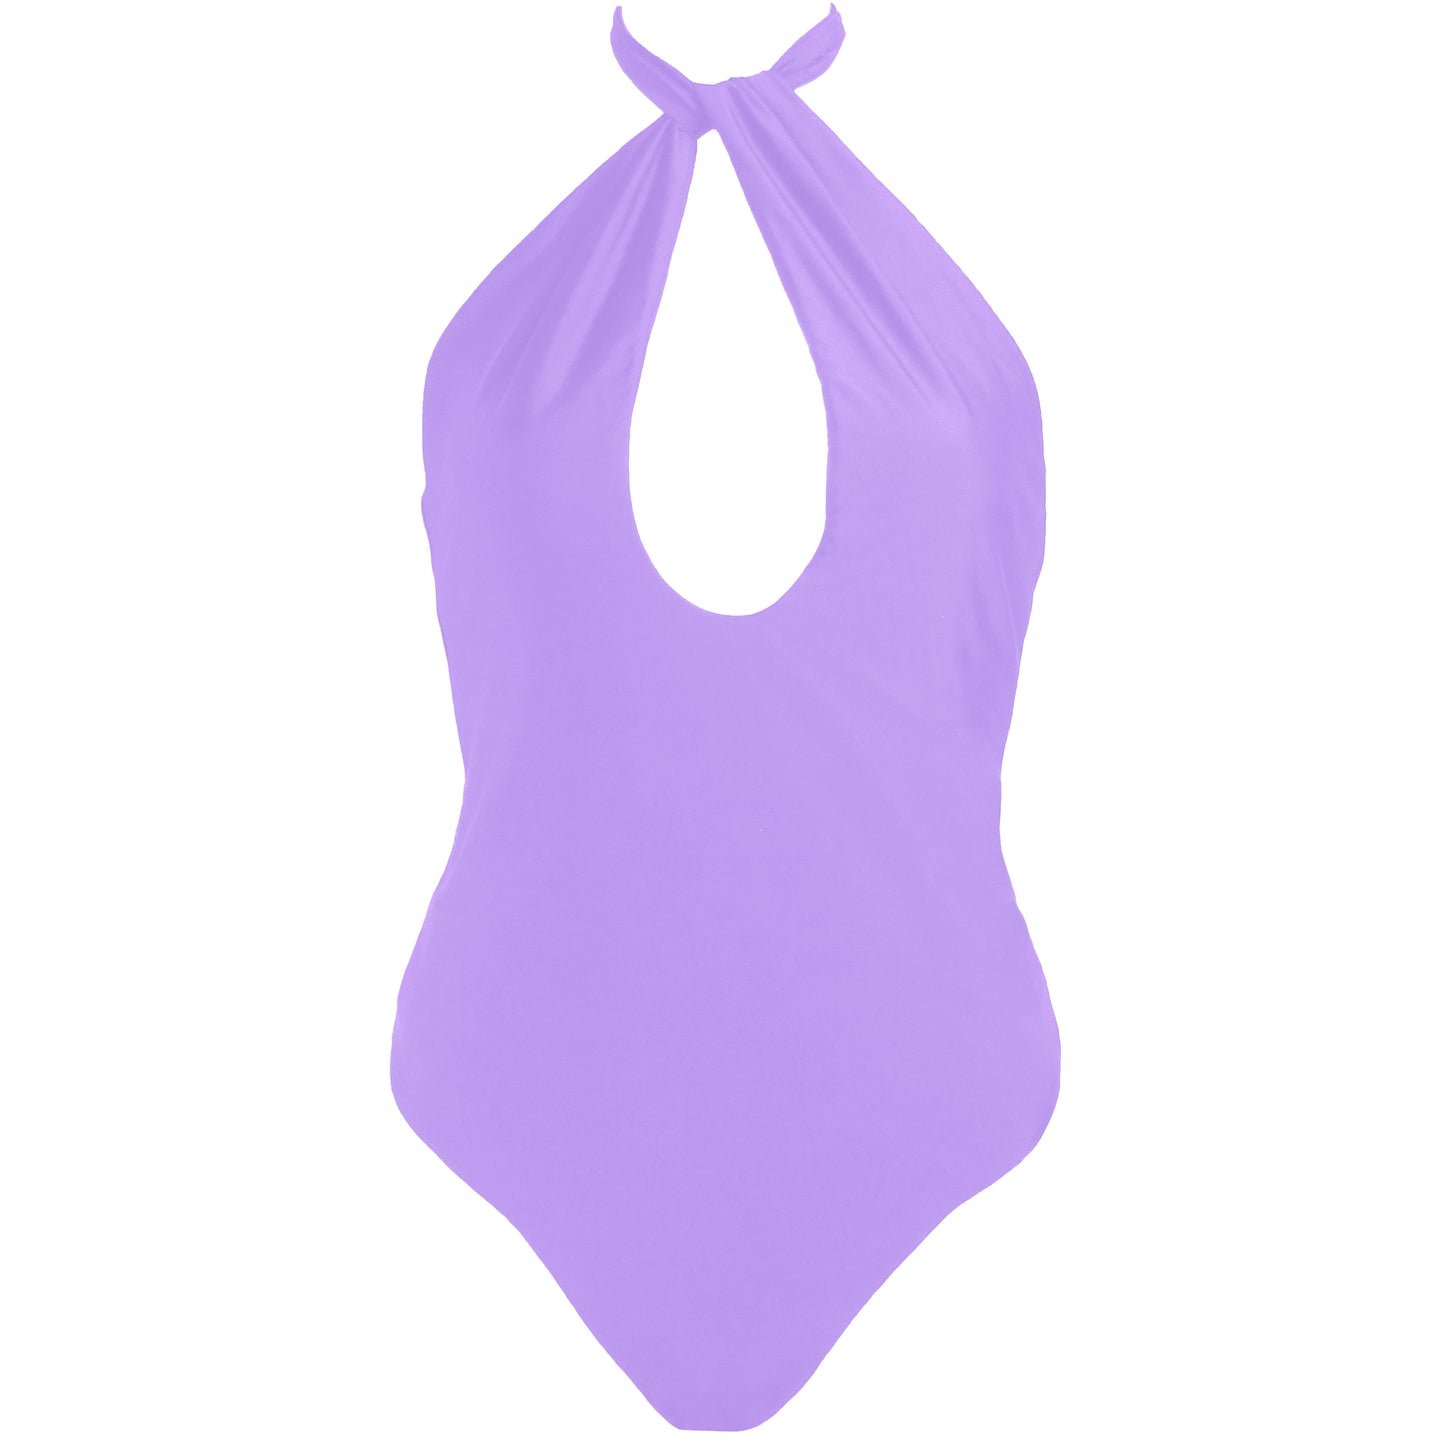 Lavender purple elevated halter one piece swimsuit with versatile cross front tie neck straps, keyhole neckline, high cut legs and full coverage.